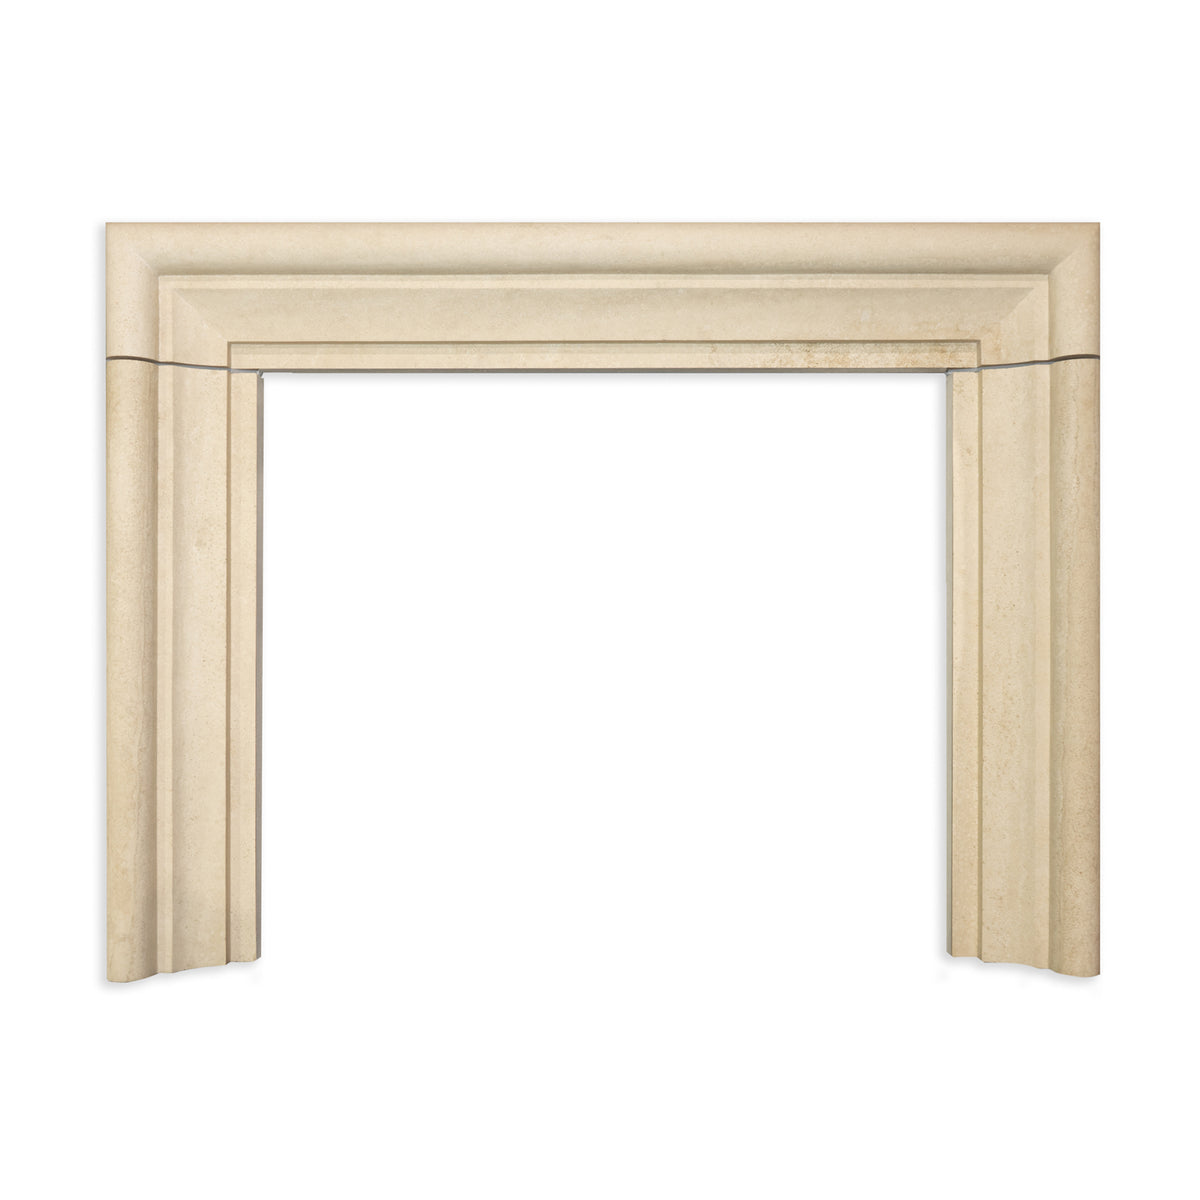 Mulberry Fireplace in Latte Travertine with Honed Finish (Extended Range) Main Product Slider View